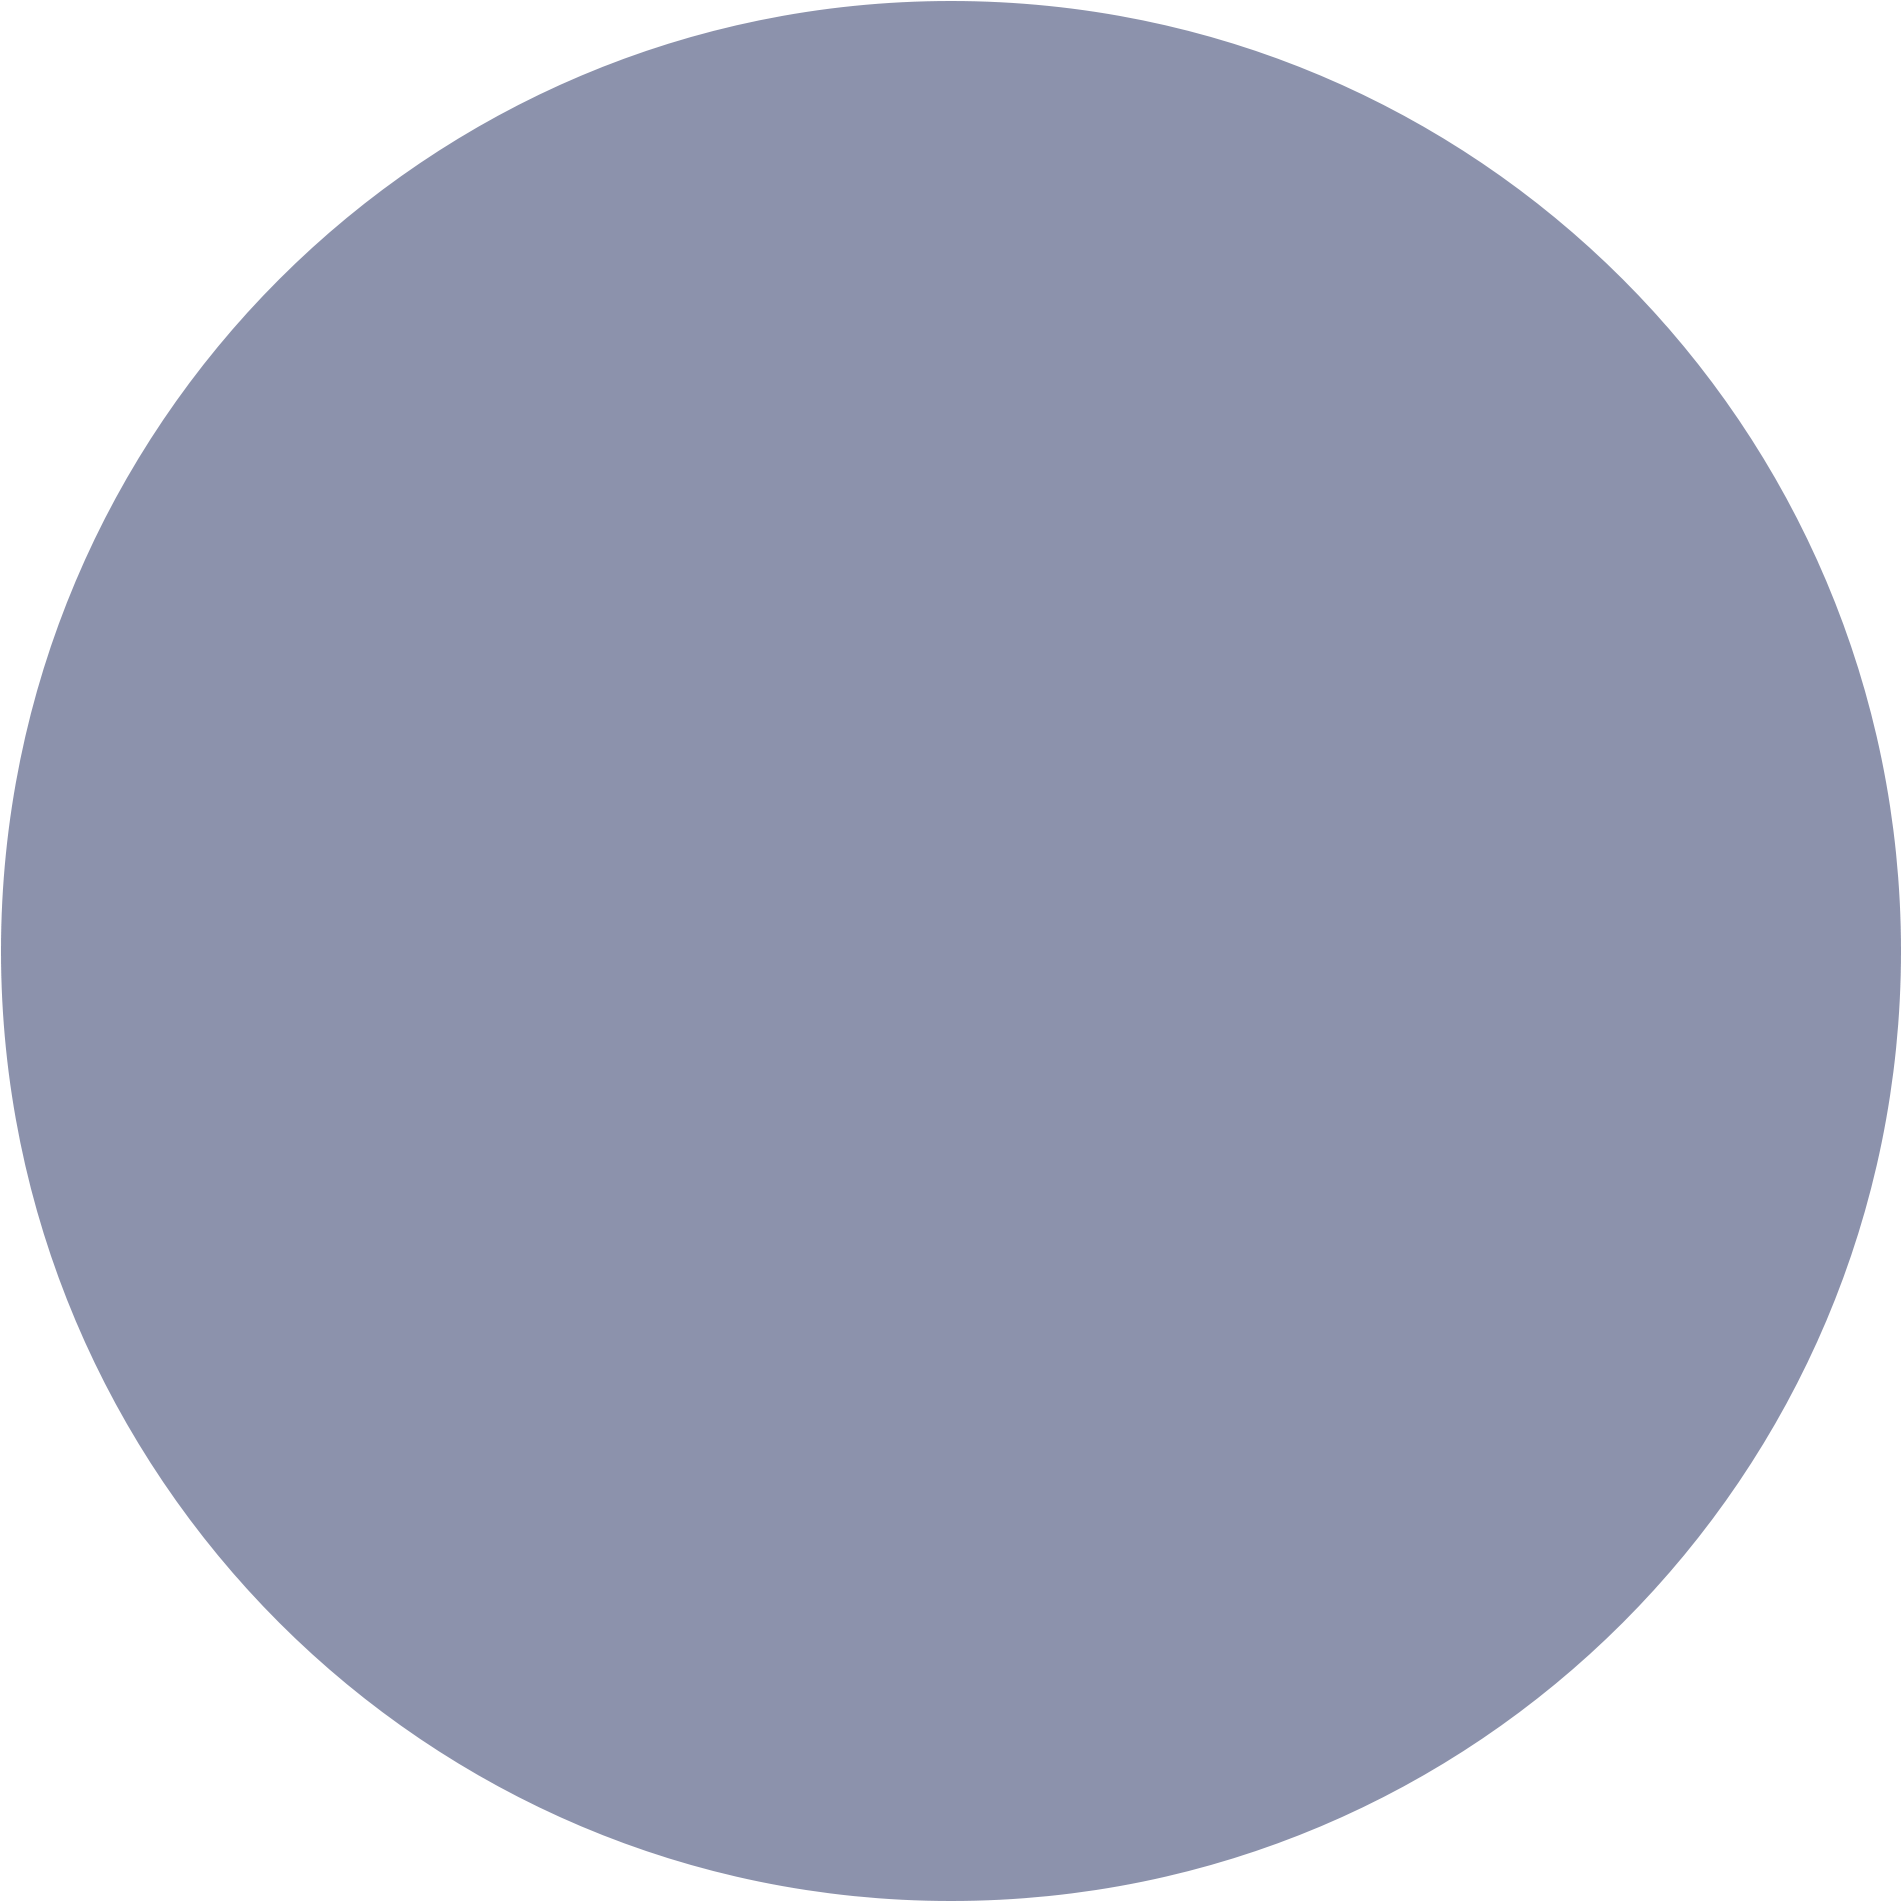 Solid Blue Circle Graphic